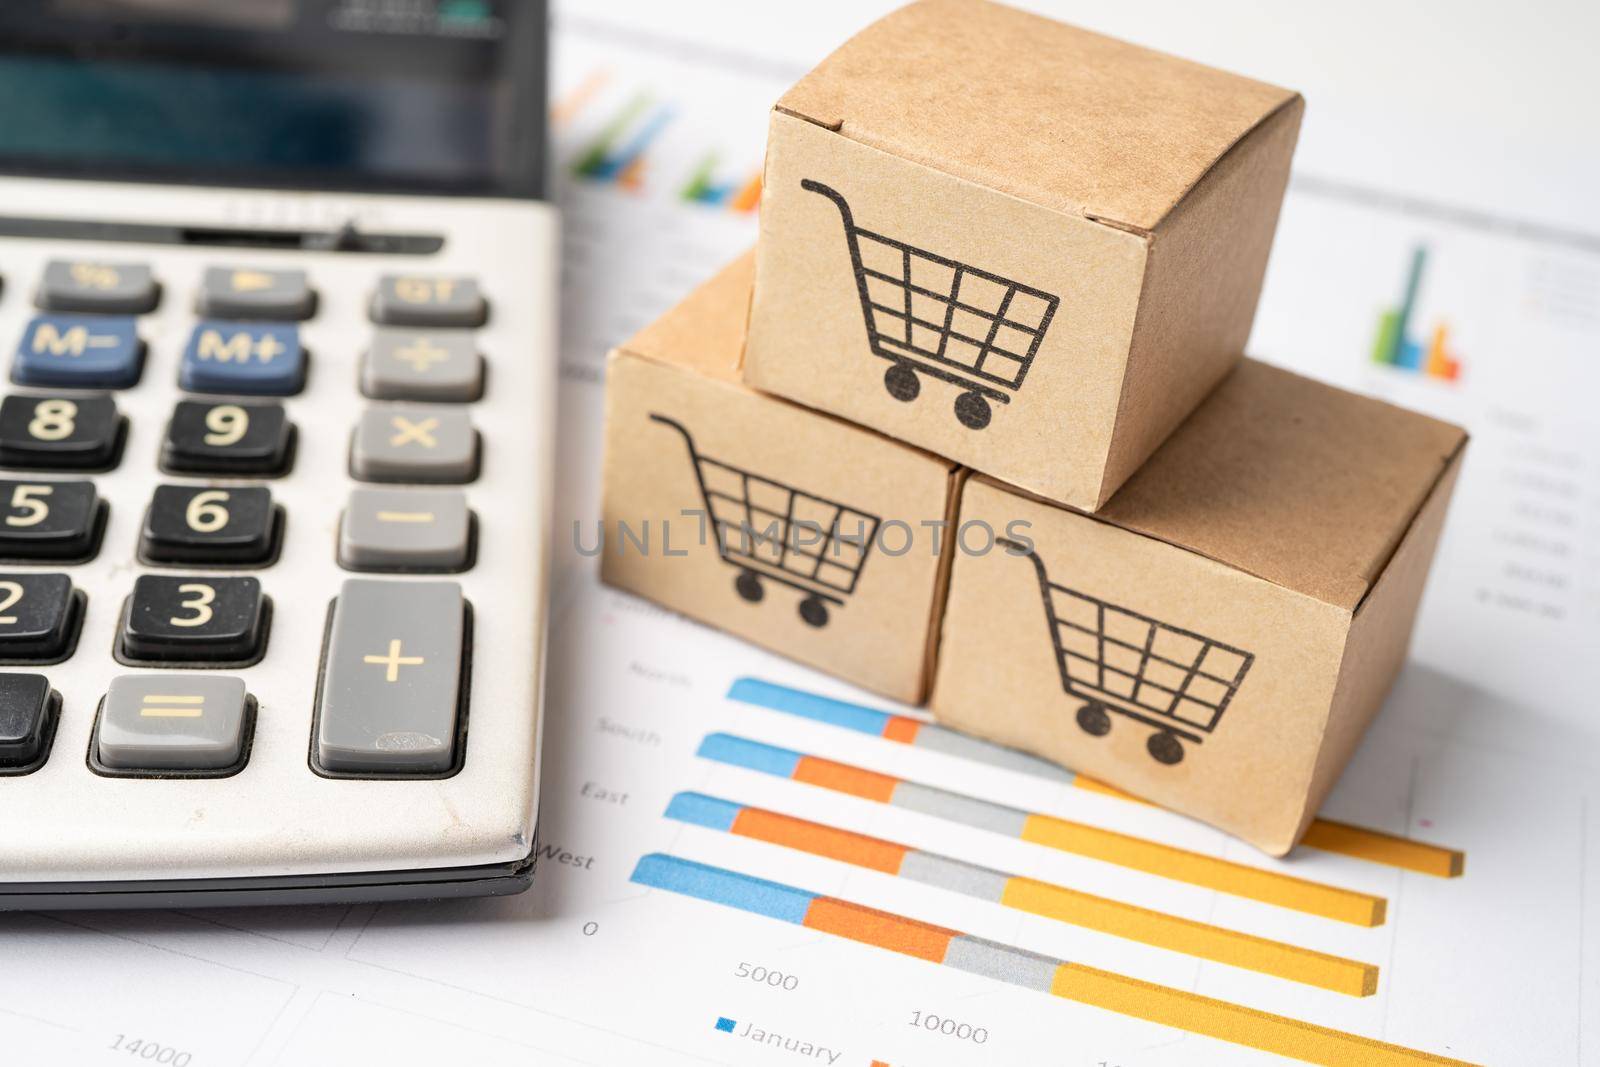 Shopping cart logo on box with magnifying glass on graph background. Banking Account, Investment Analytic research data economy, trading, Business import export transportation online company concept.